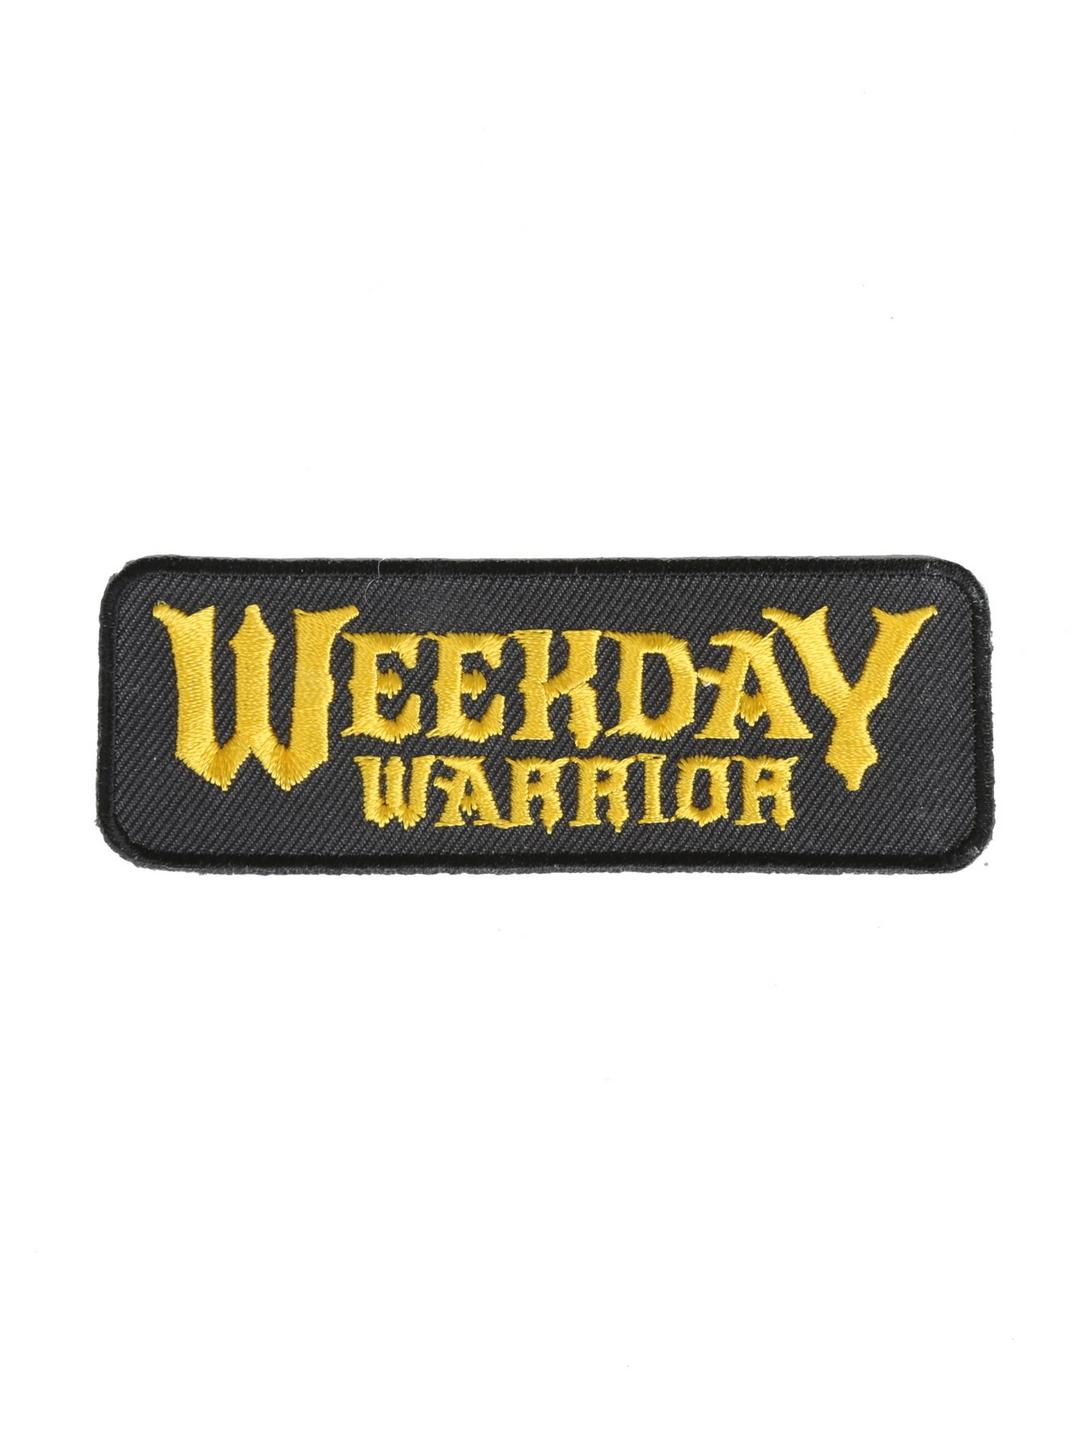 Son Of Zorn Weekday Warrior Iron-On Patch, , hi-res